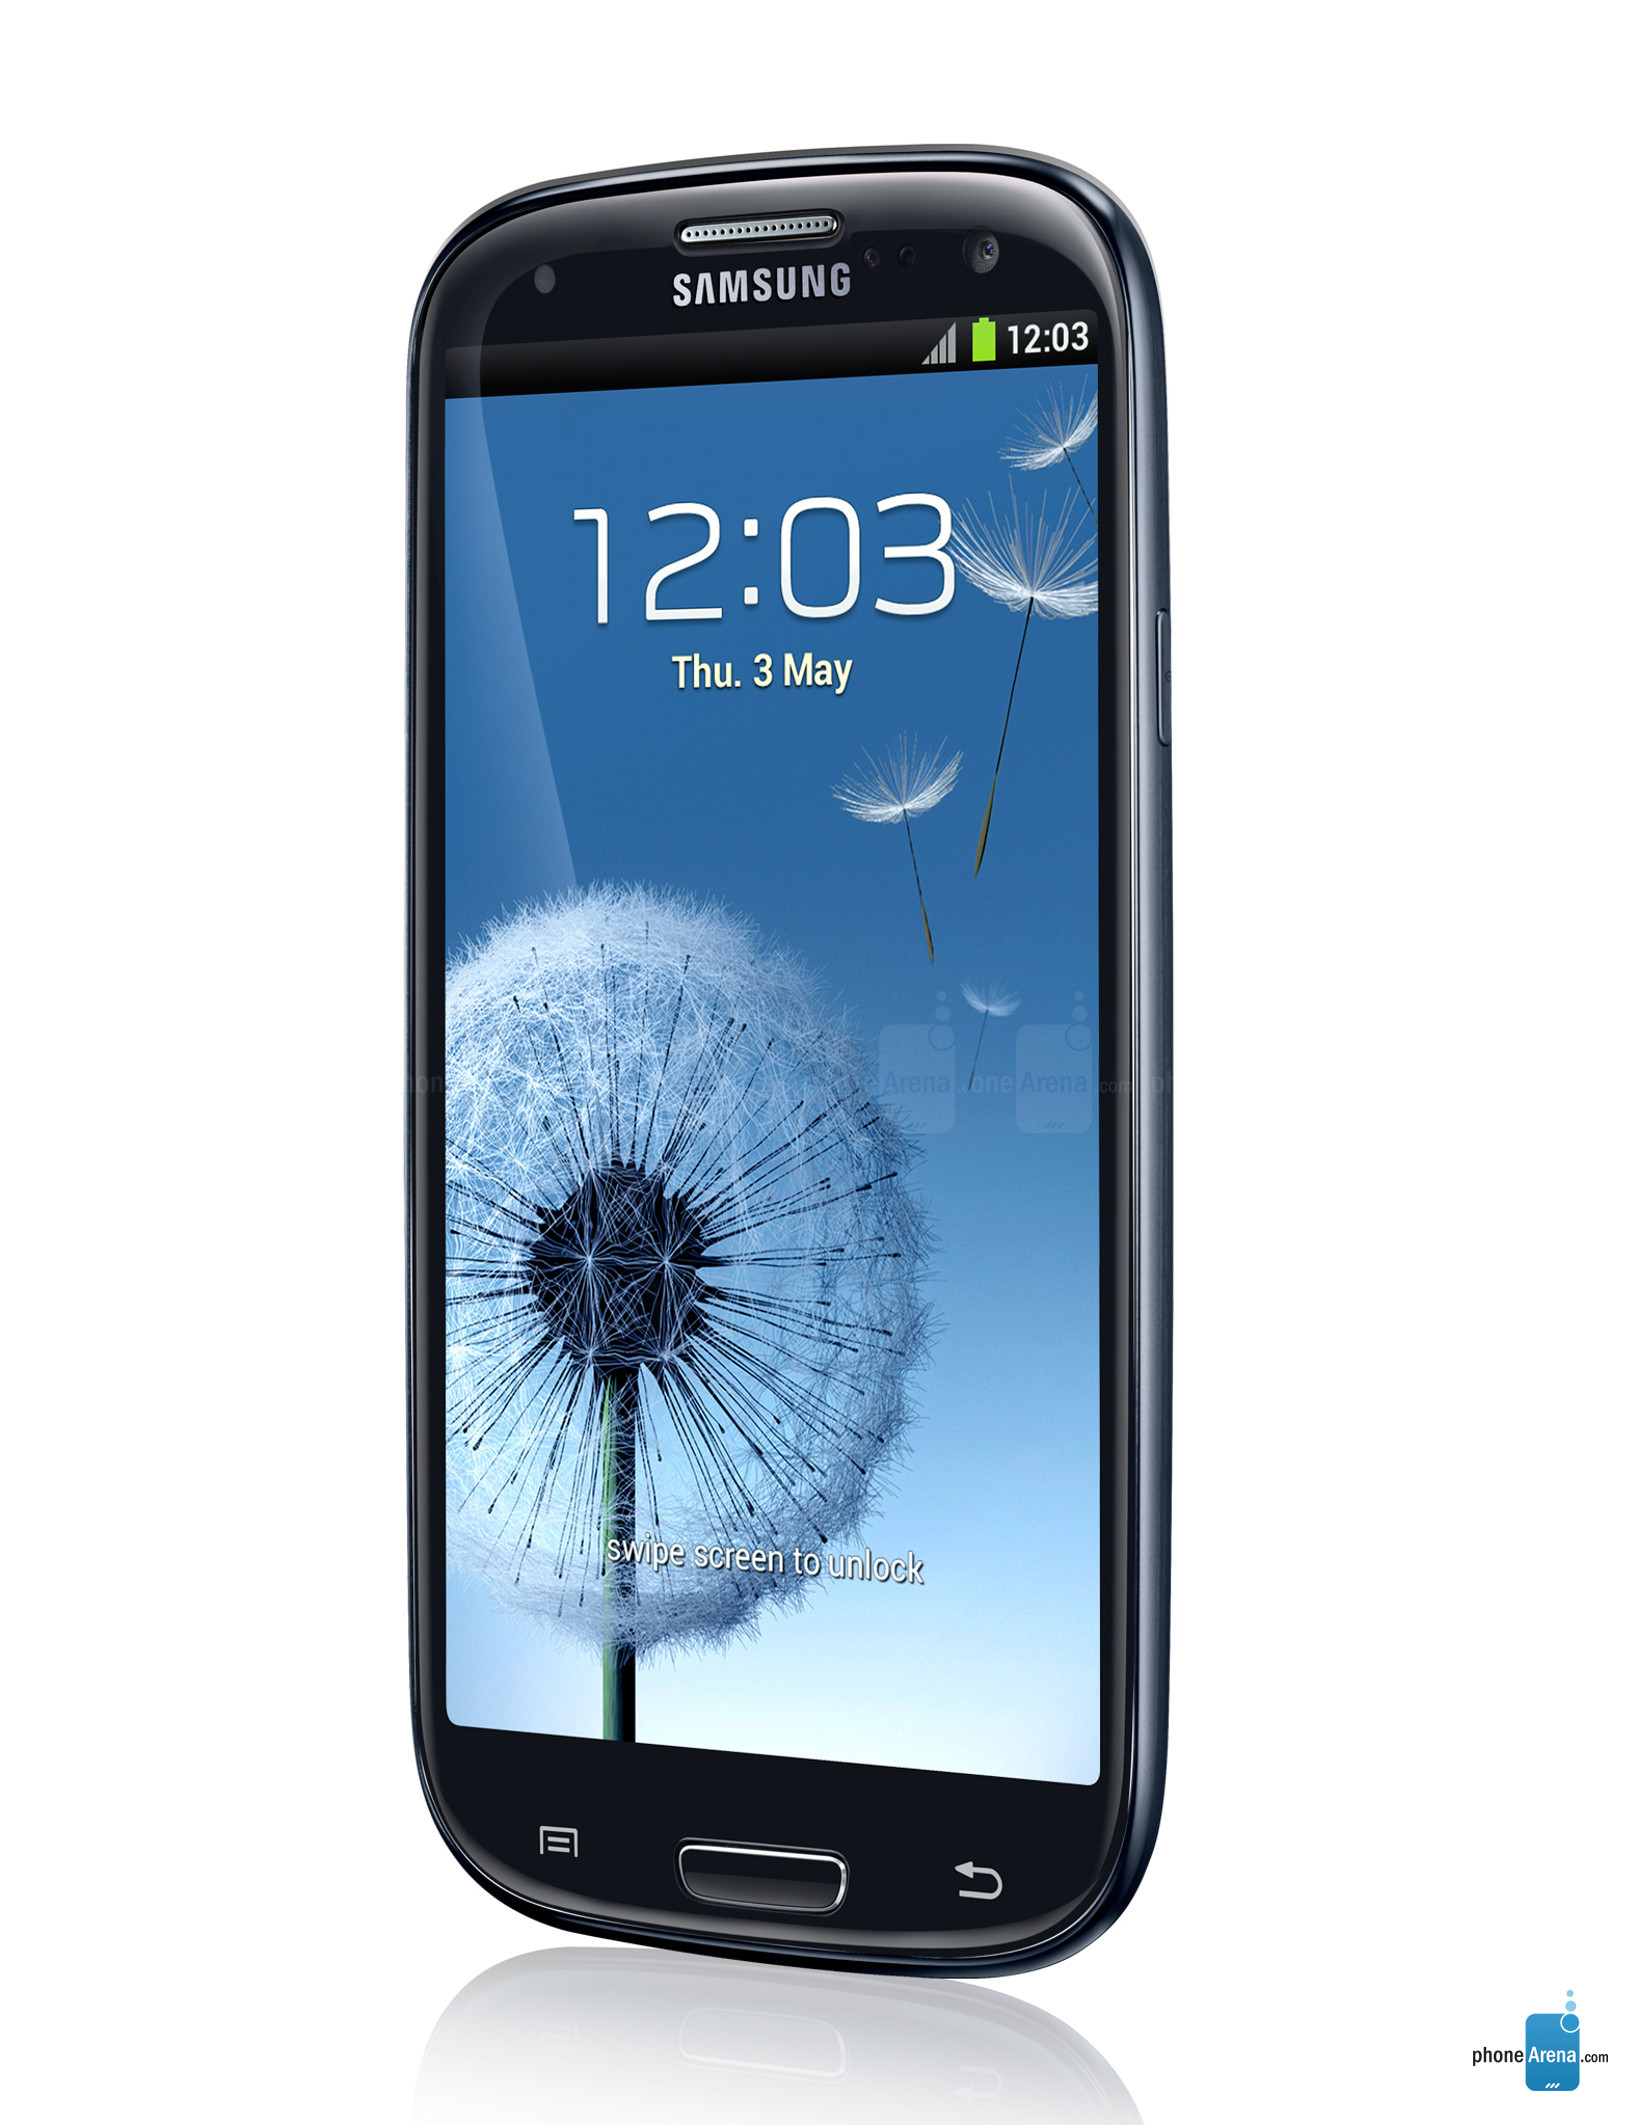 Samsung Galaxy S3 Wallpaper Size Pictures To Pin